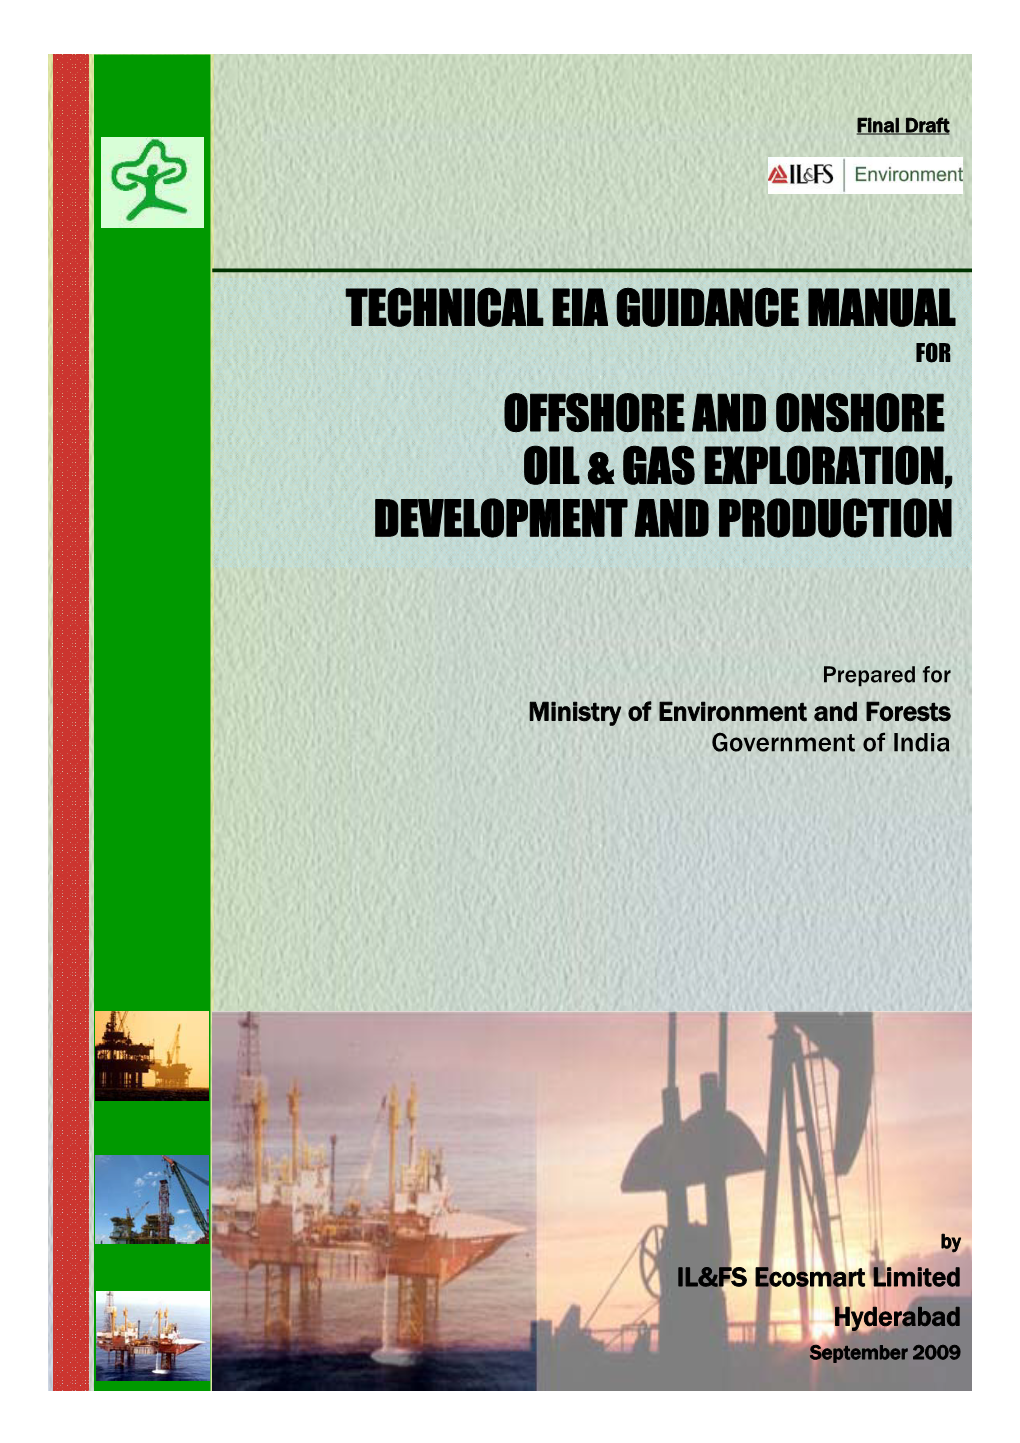 Technical Eia Guidance Manual Offshore and Onshore Oil & Gas Exploration, Development and Production